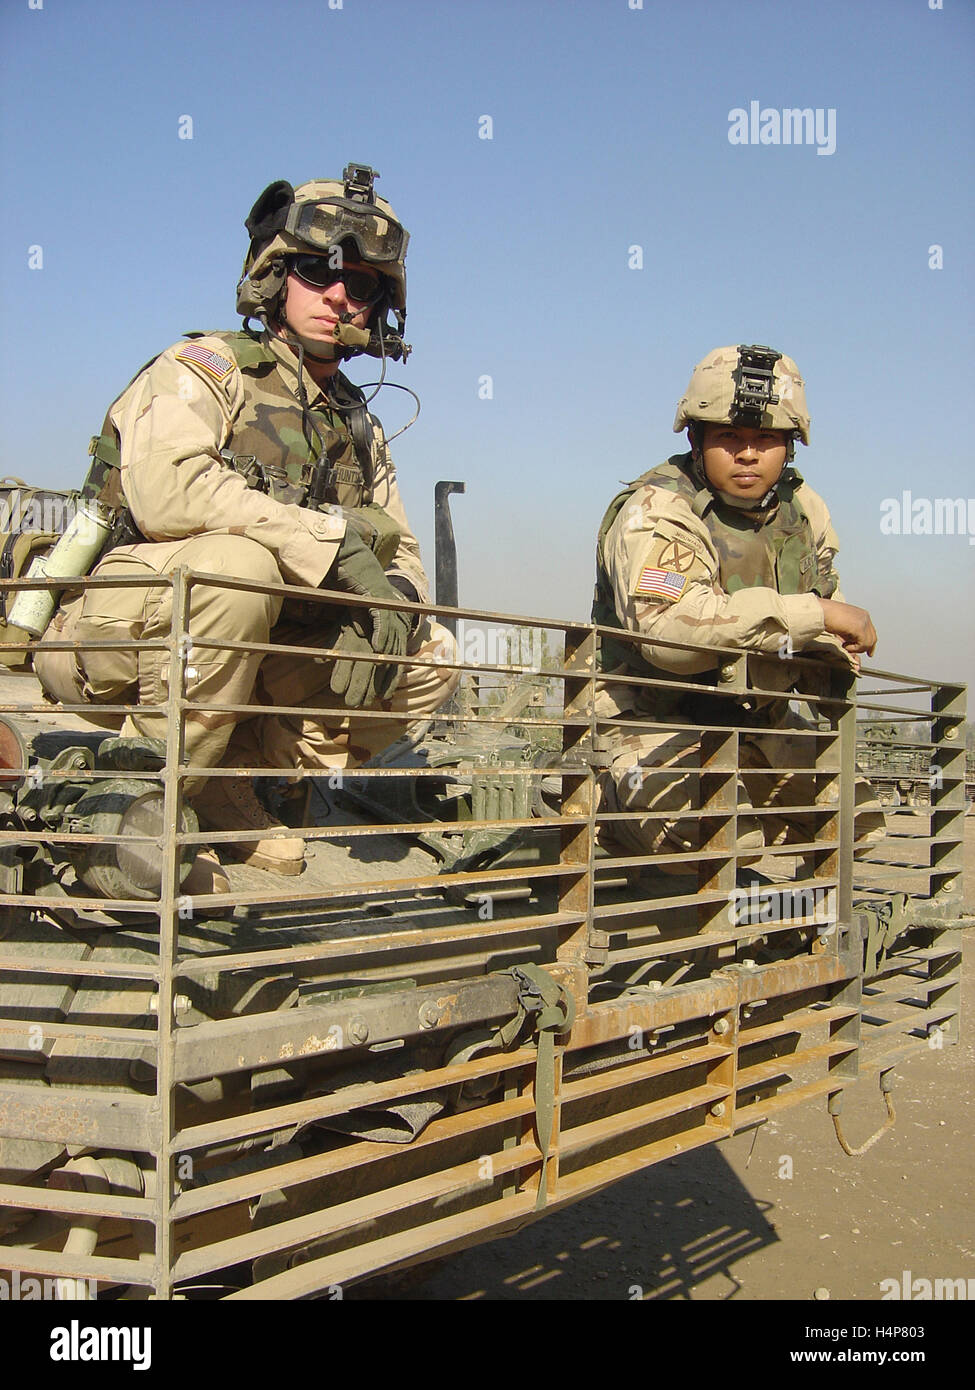 25th November 2004 U.S. Army soldiers on their Stryker ICV at FOB Marez, Mosul, northern Iraq. Stock Photo